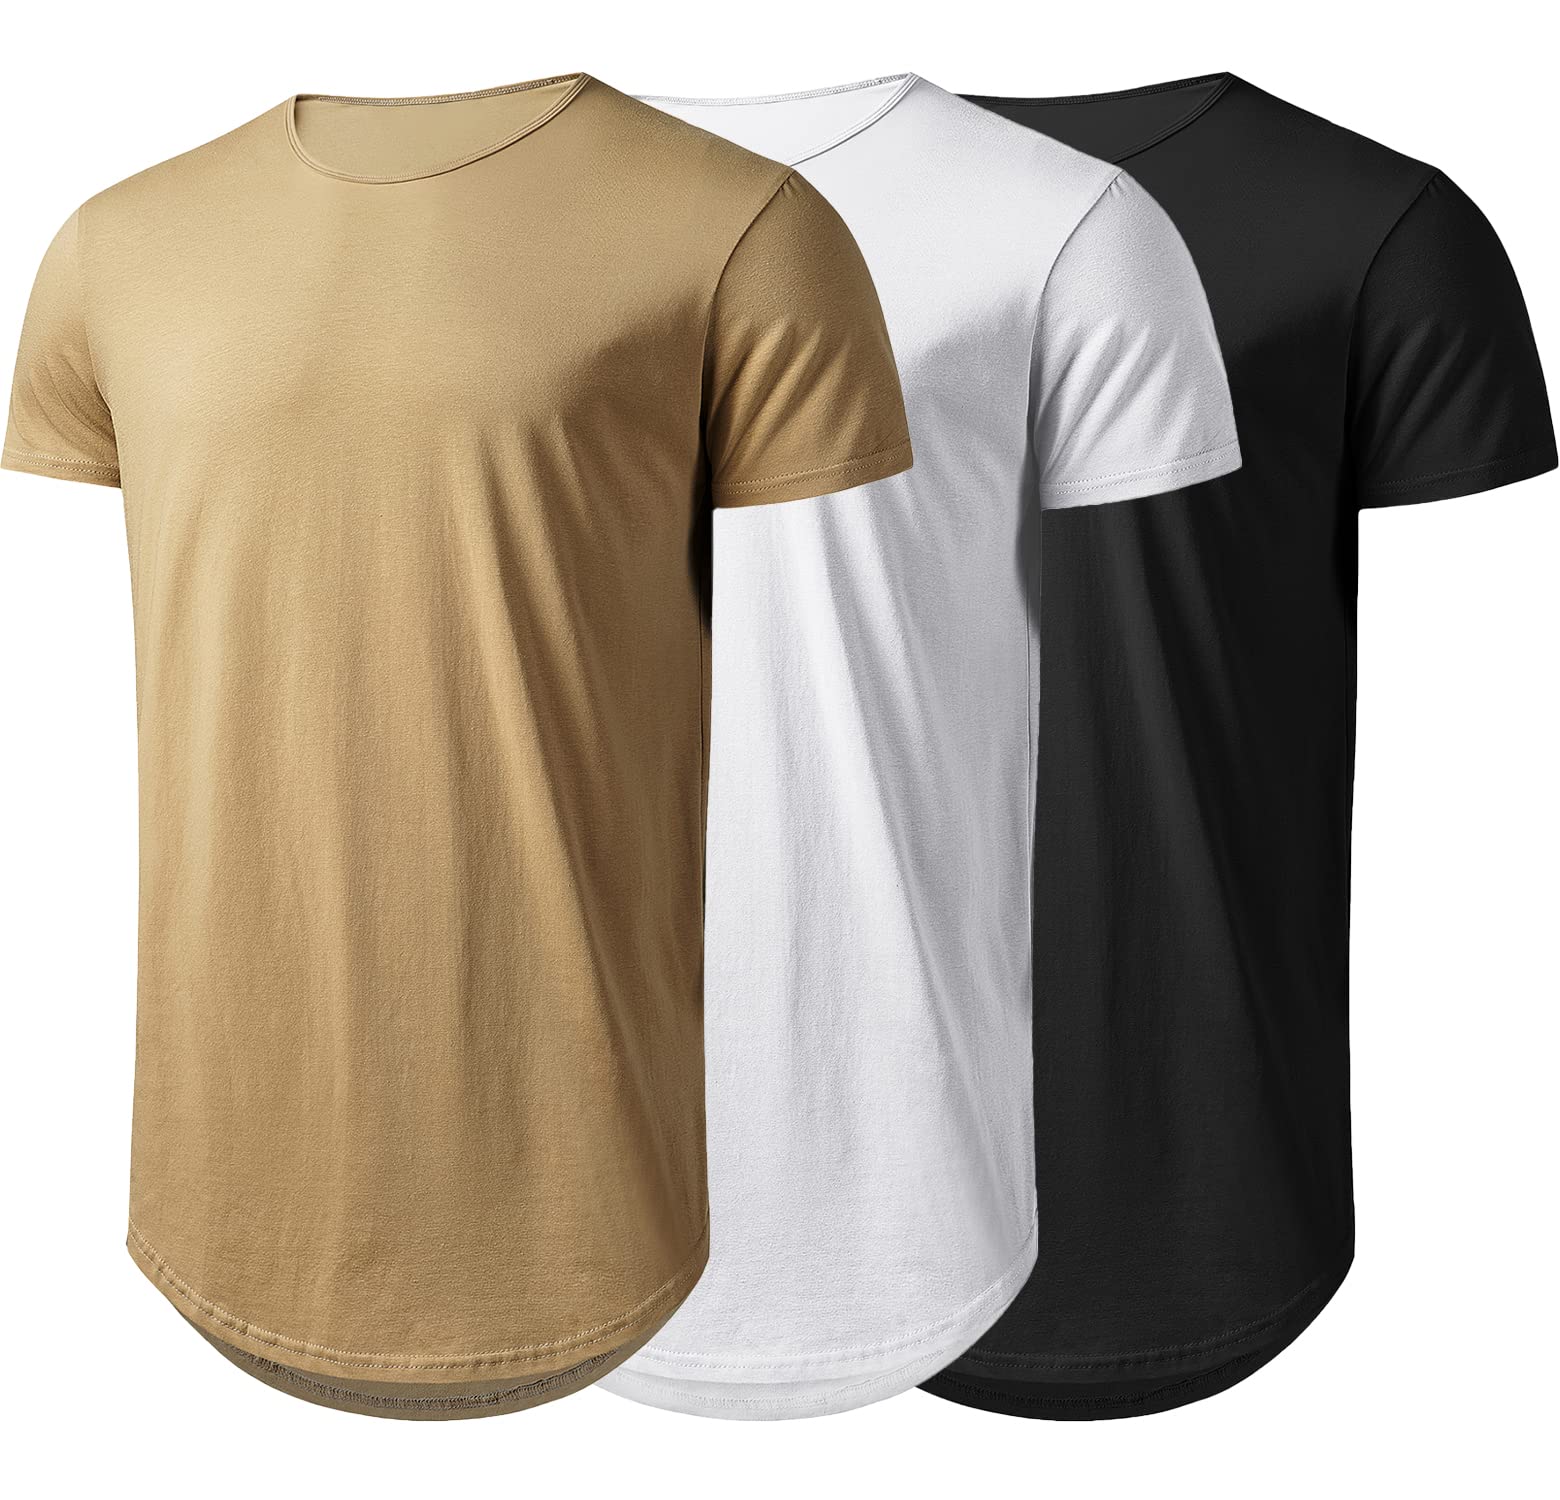 Athlemon Long Shirts For Men Extra Long T Shirts Bylt Basics Mens T-Shirts Hip Hop Shirts For Men Gym Shirts Longline Hipster 3 